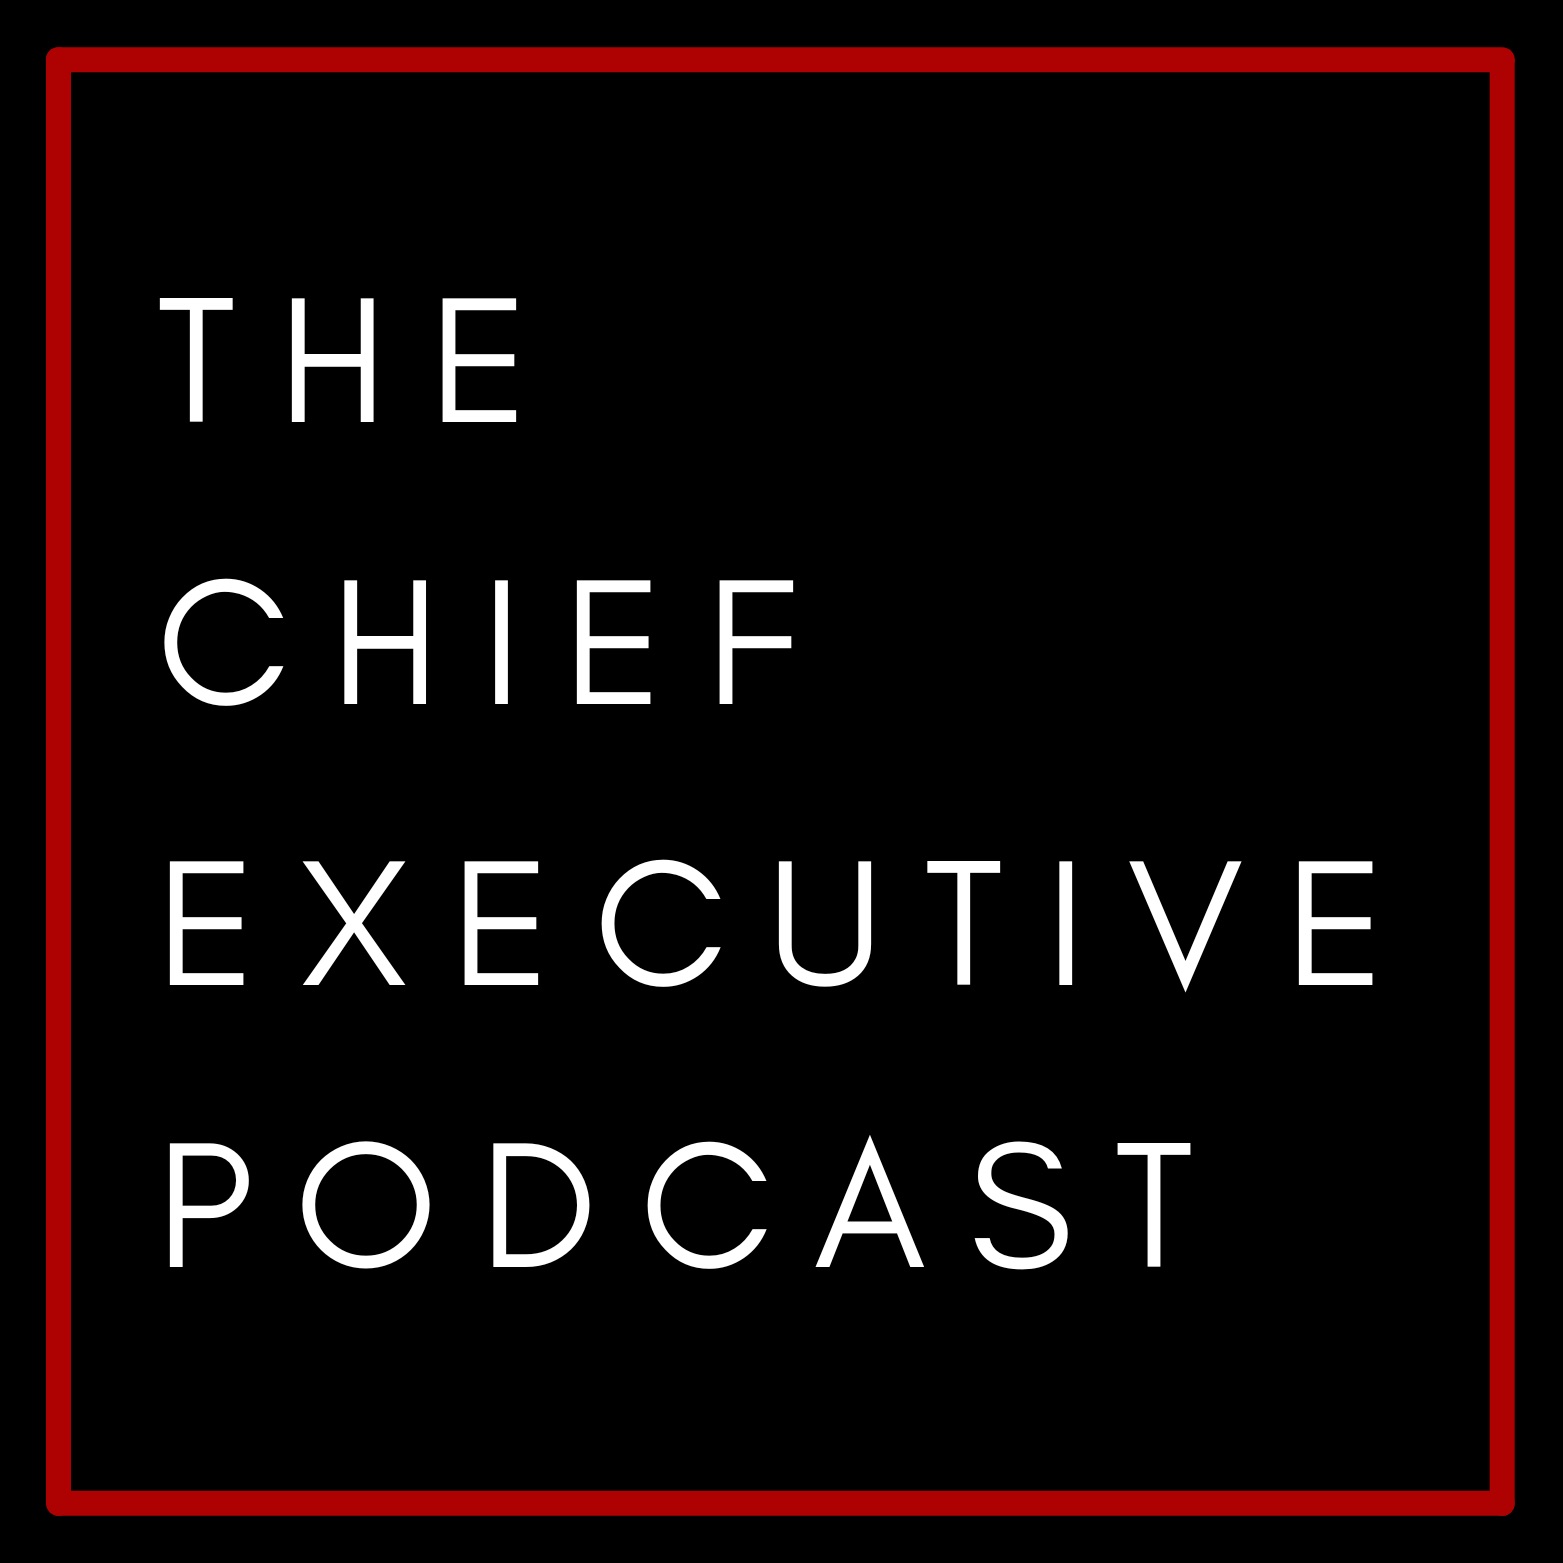 The Chief Executive Podcast